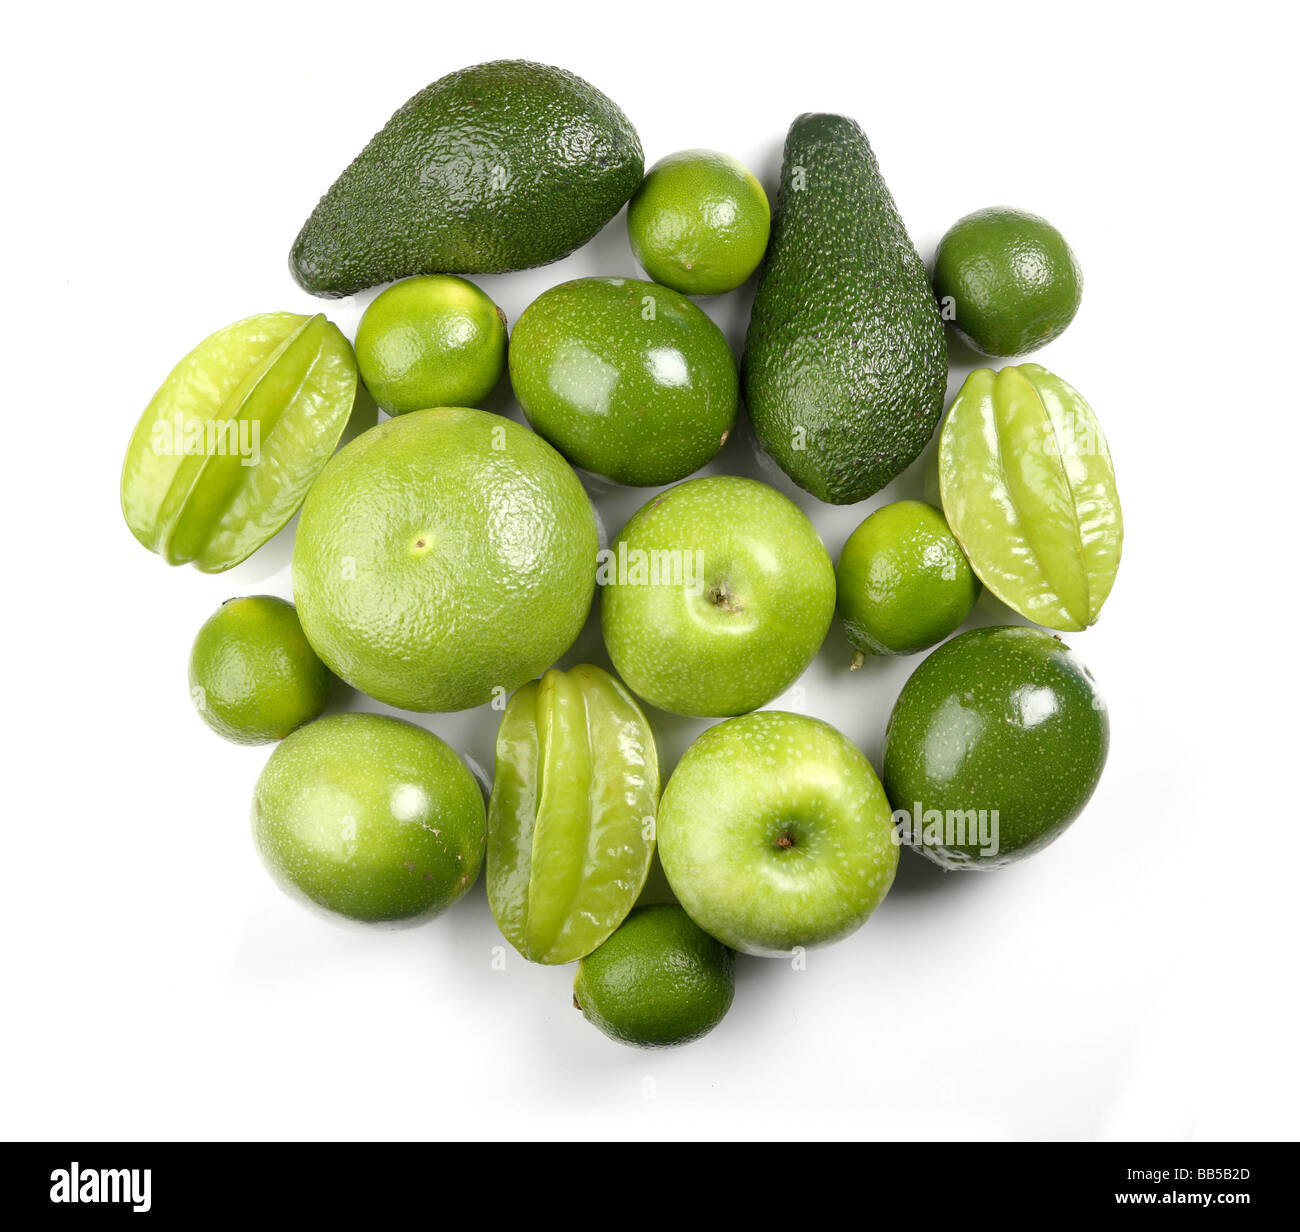 Composition of green citrus fruits Stock Photo